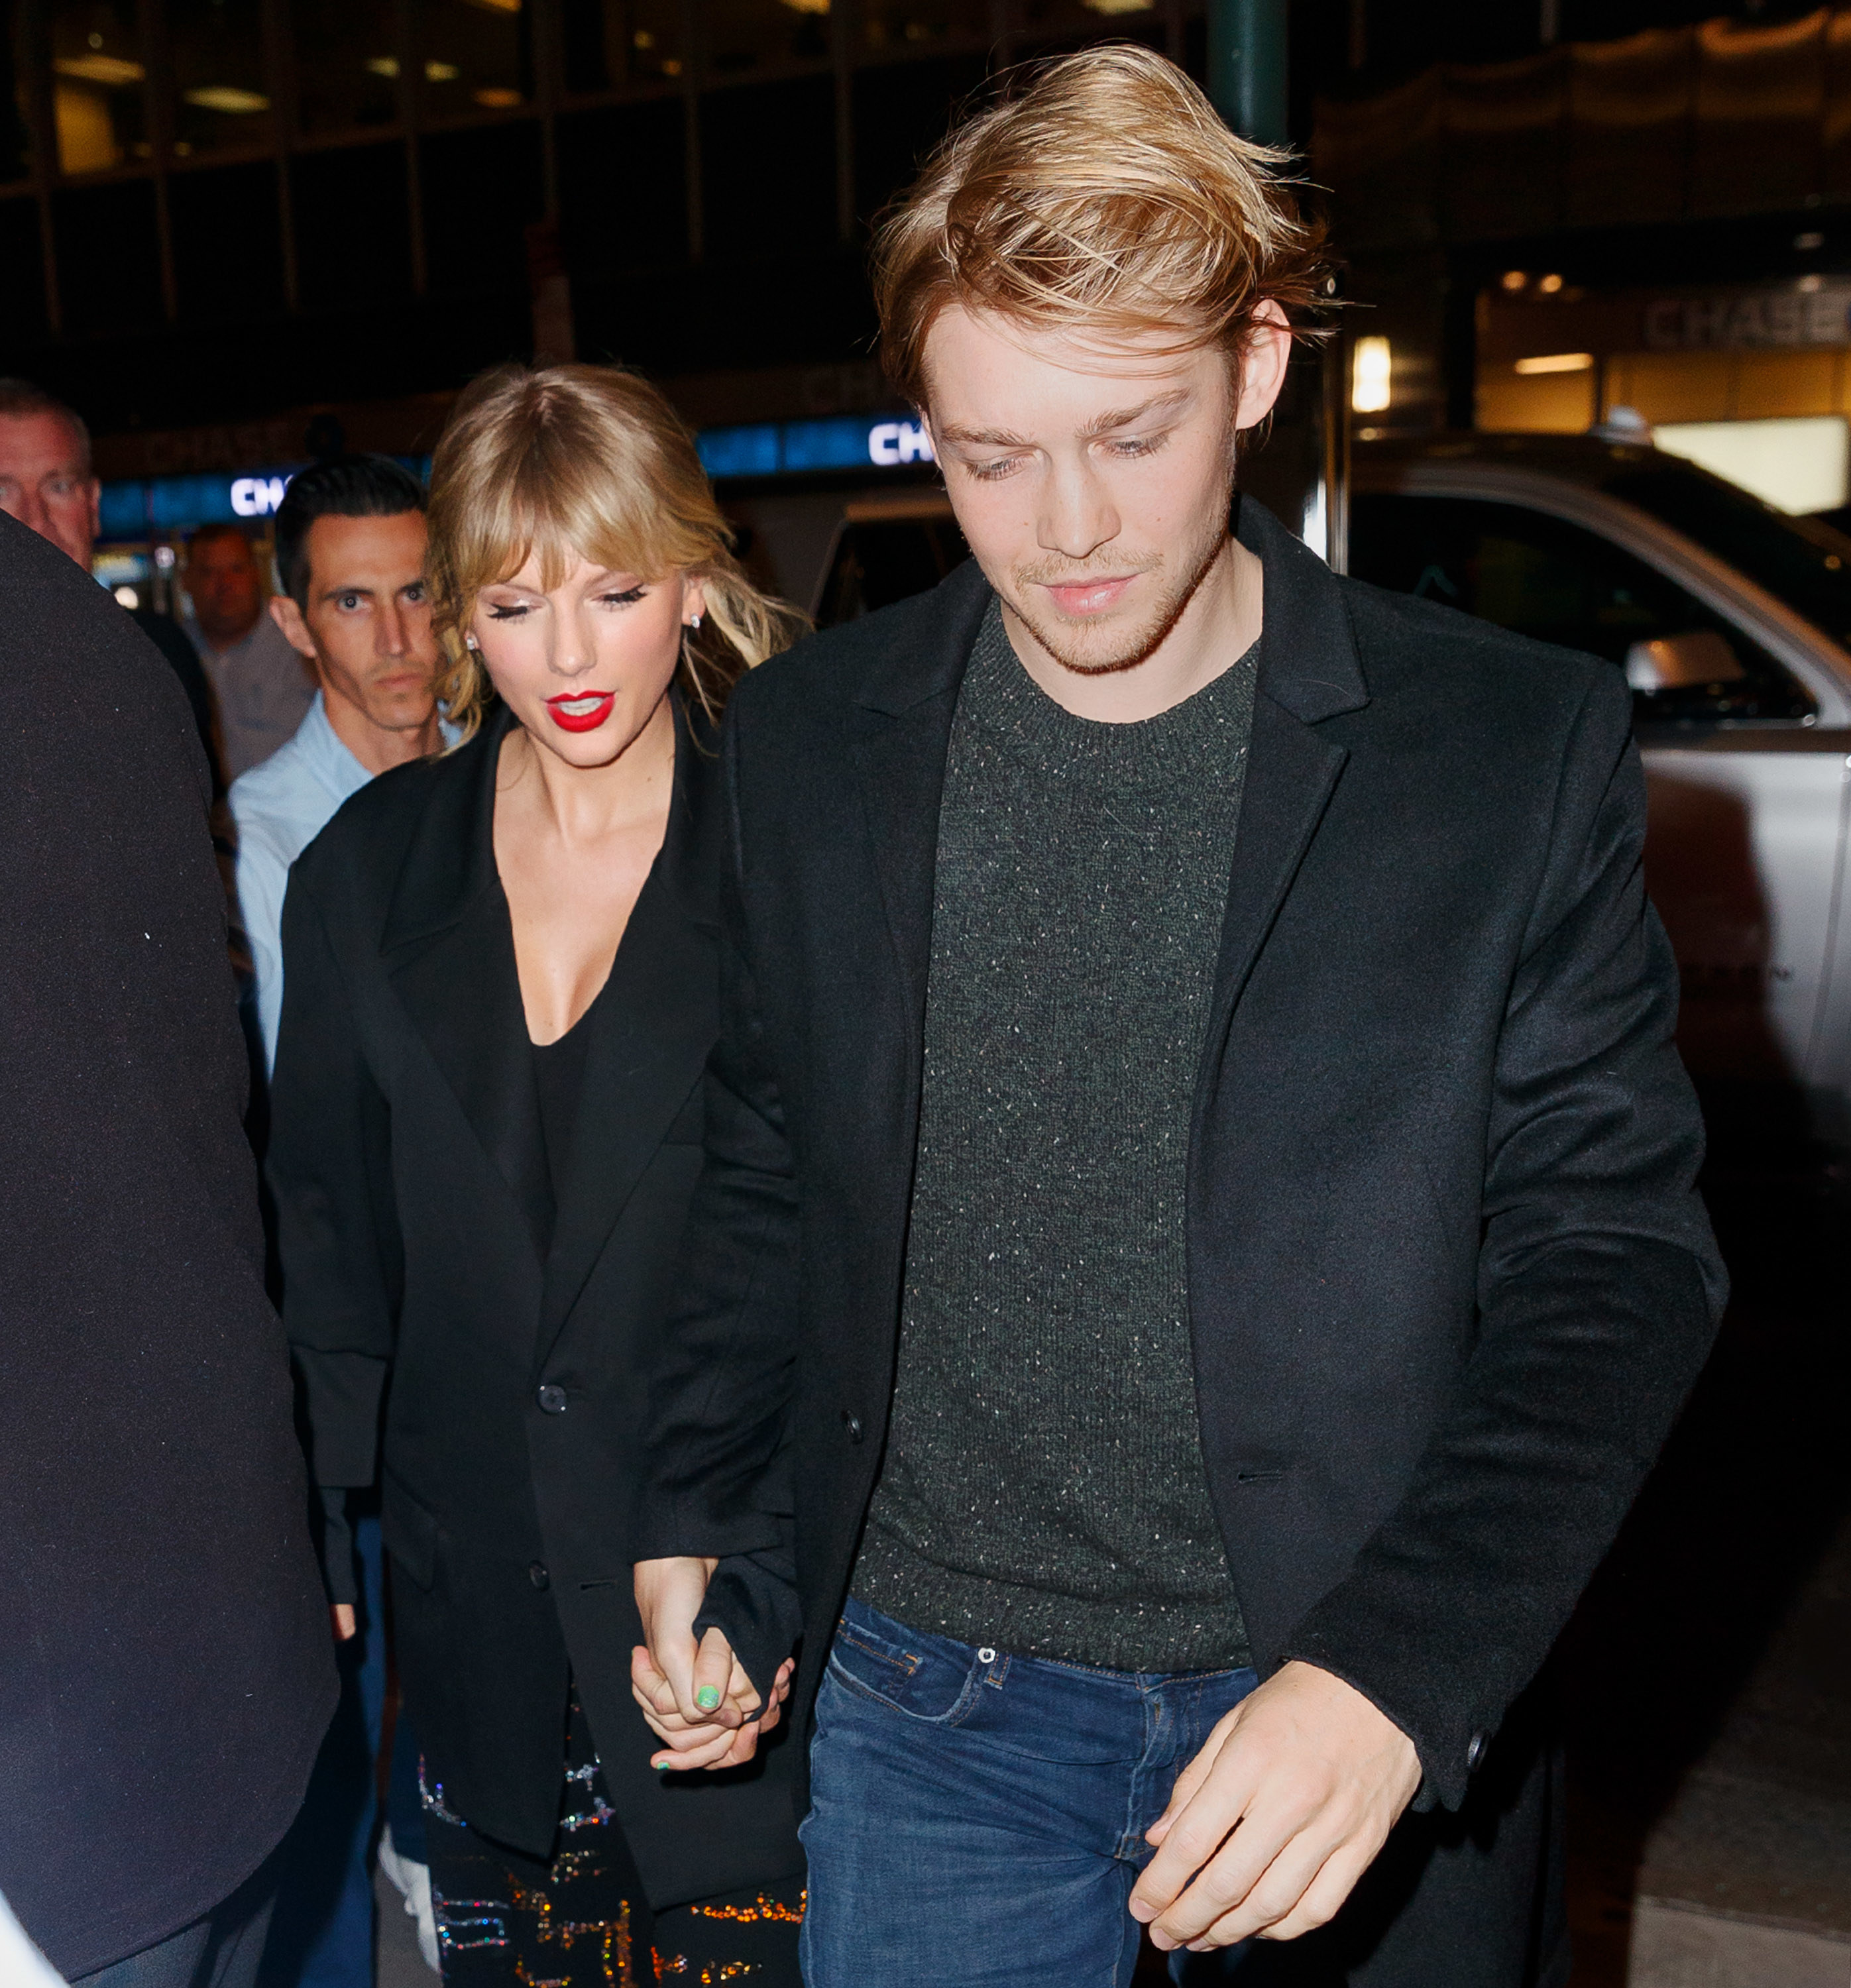 Taylor and Joe walking and holding hands